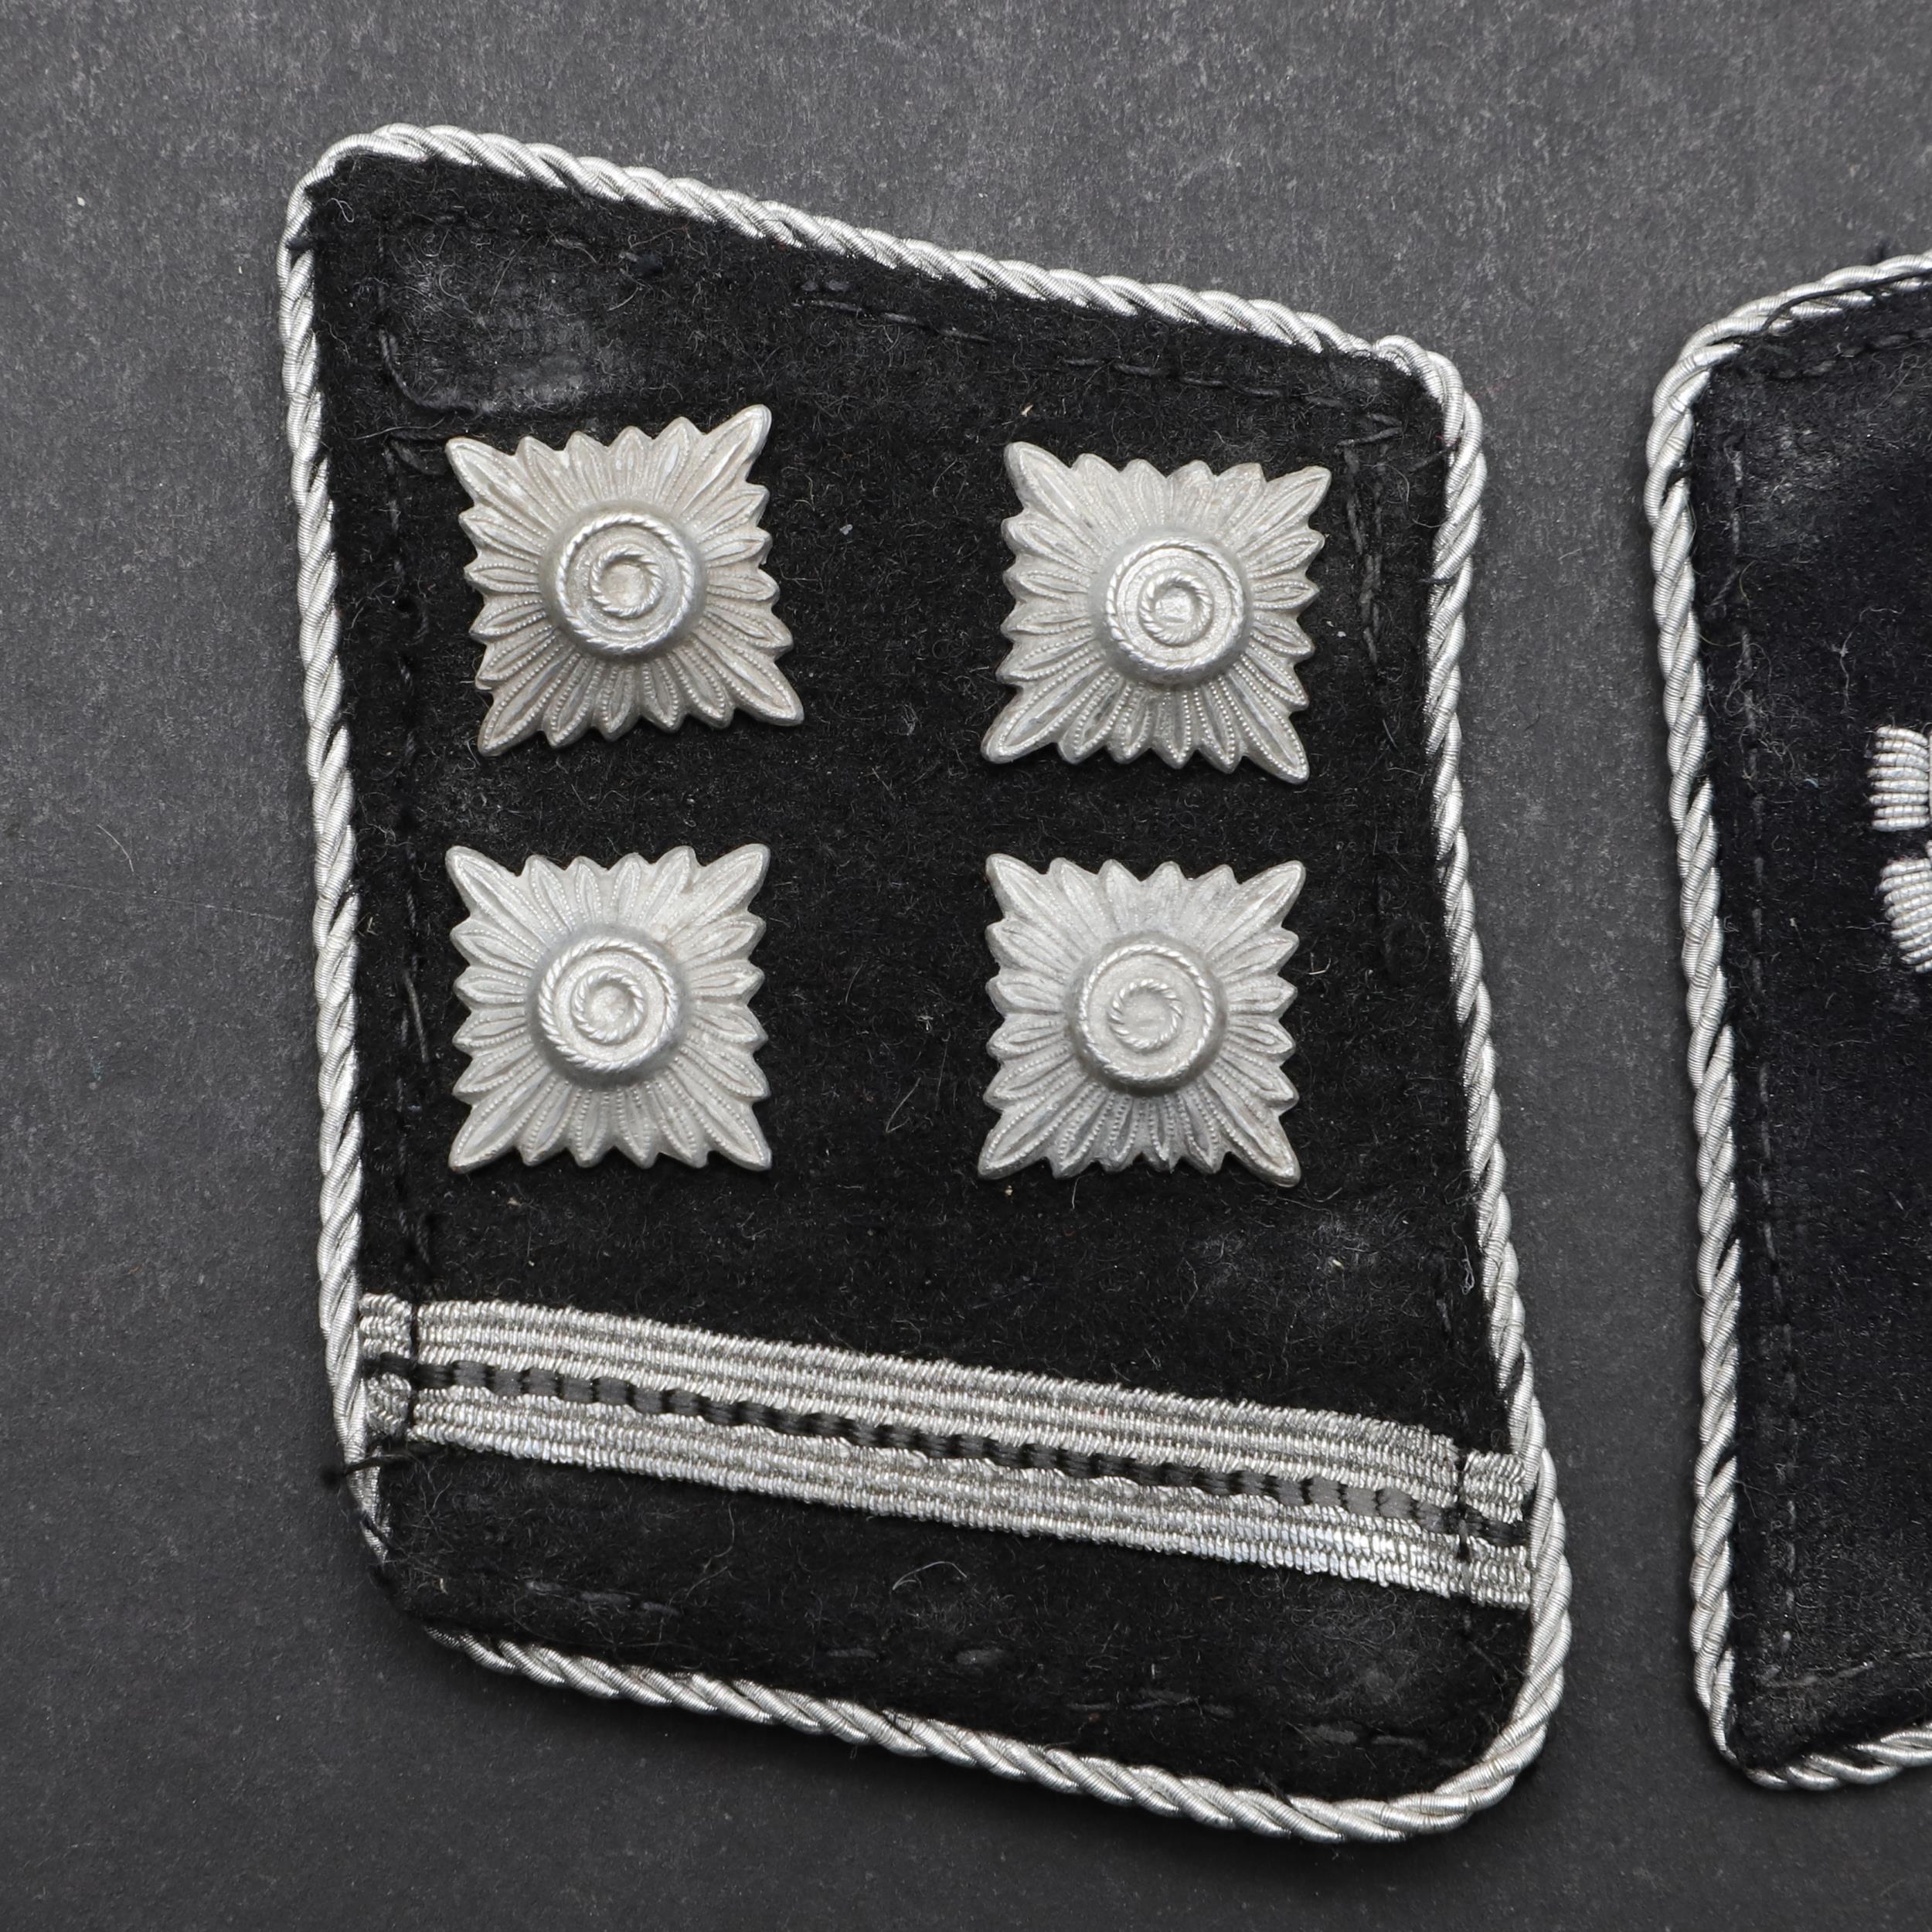 A PAIR OF SECOND WORLD WAR GERMAN SS OFFICER'S COLLAR PATCHES. - Image 2 of 4